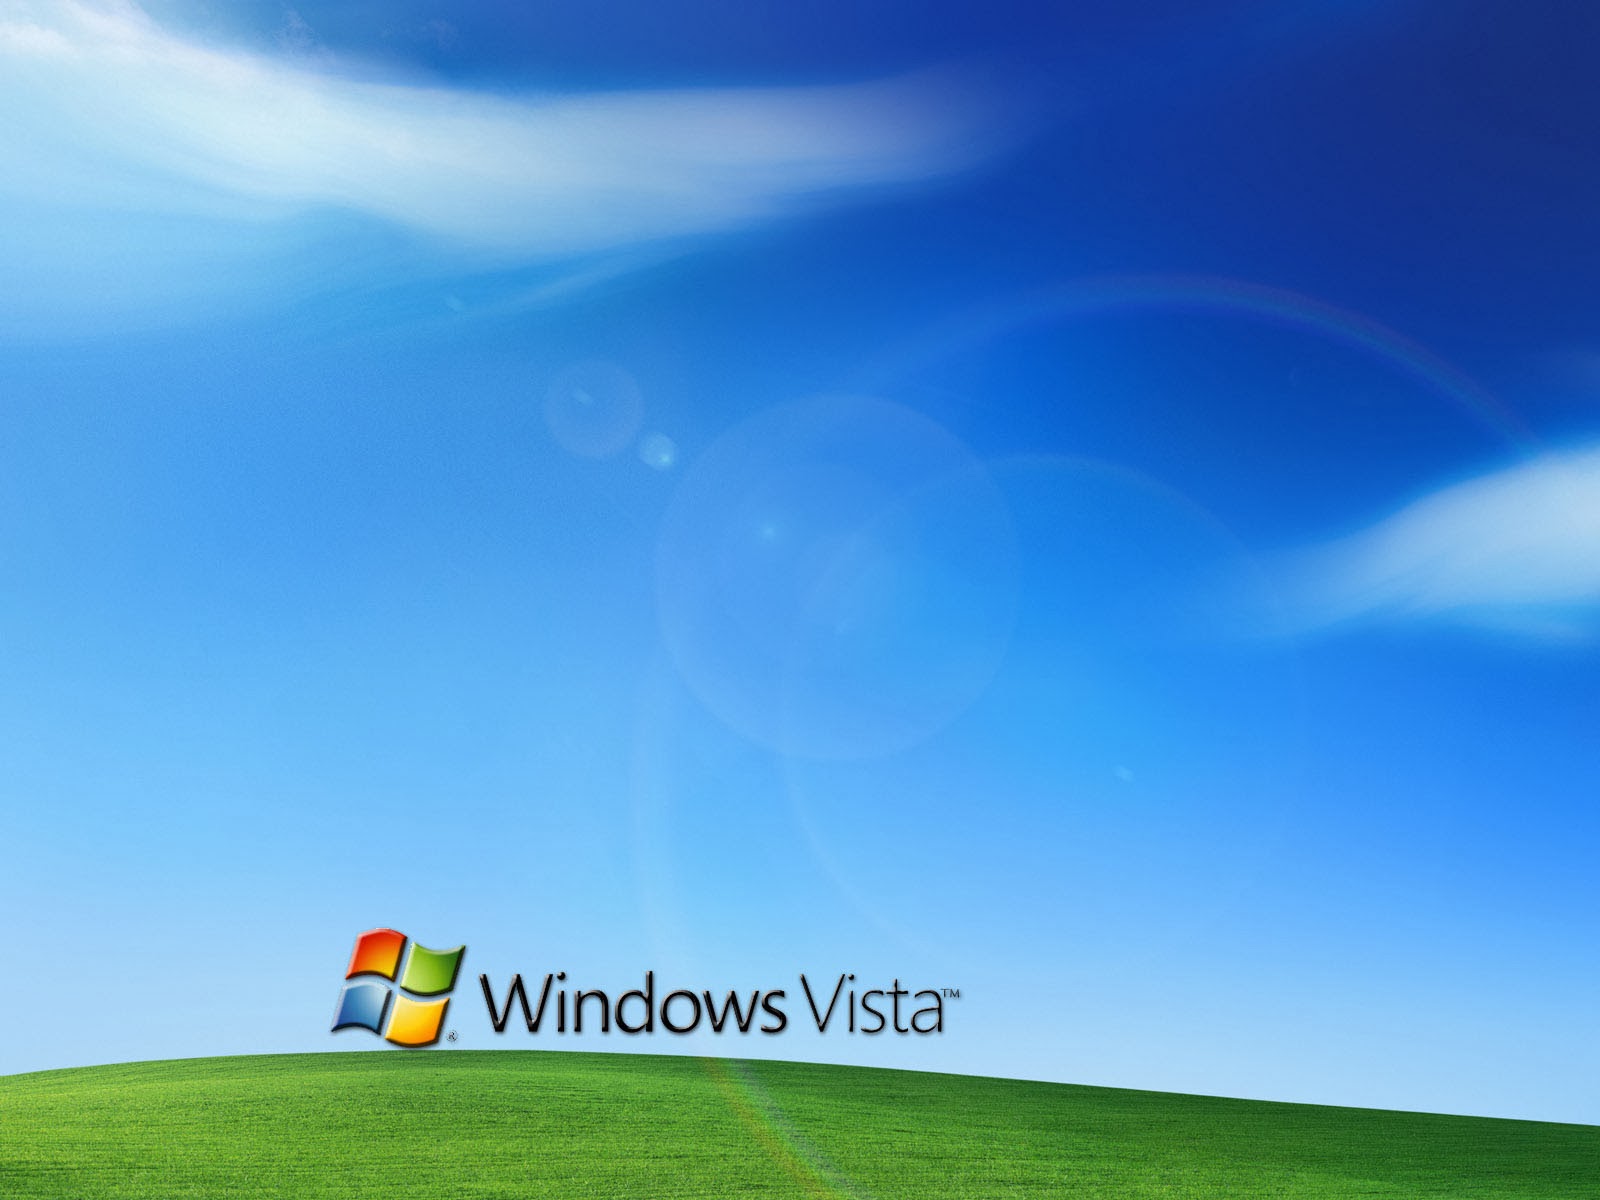 Tag Windows Vista Bliss Wallpaper Background Photos Image And